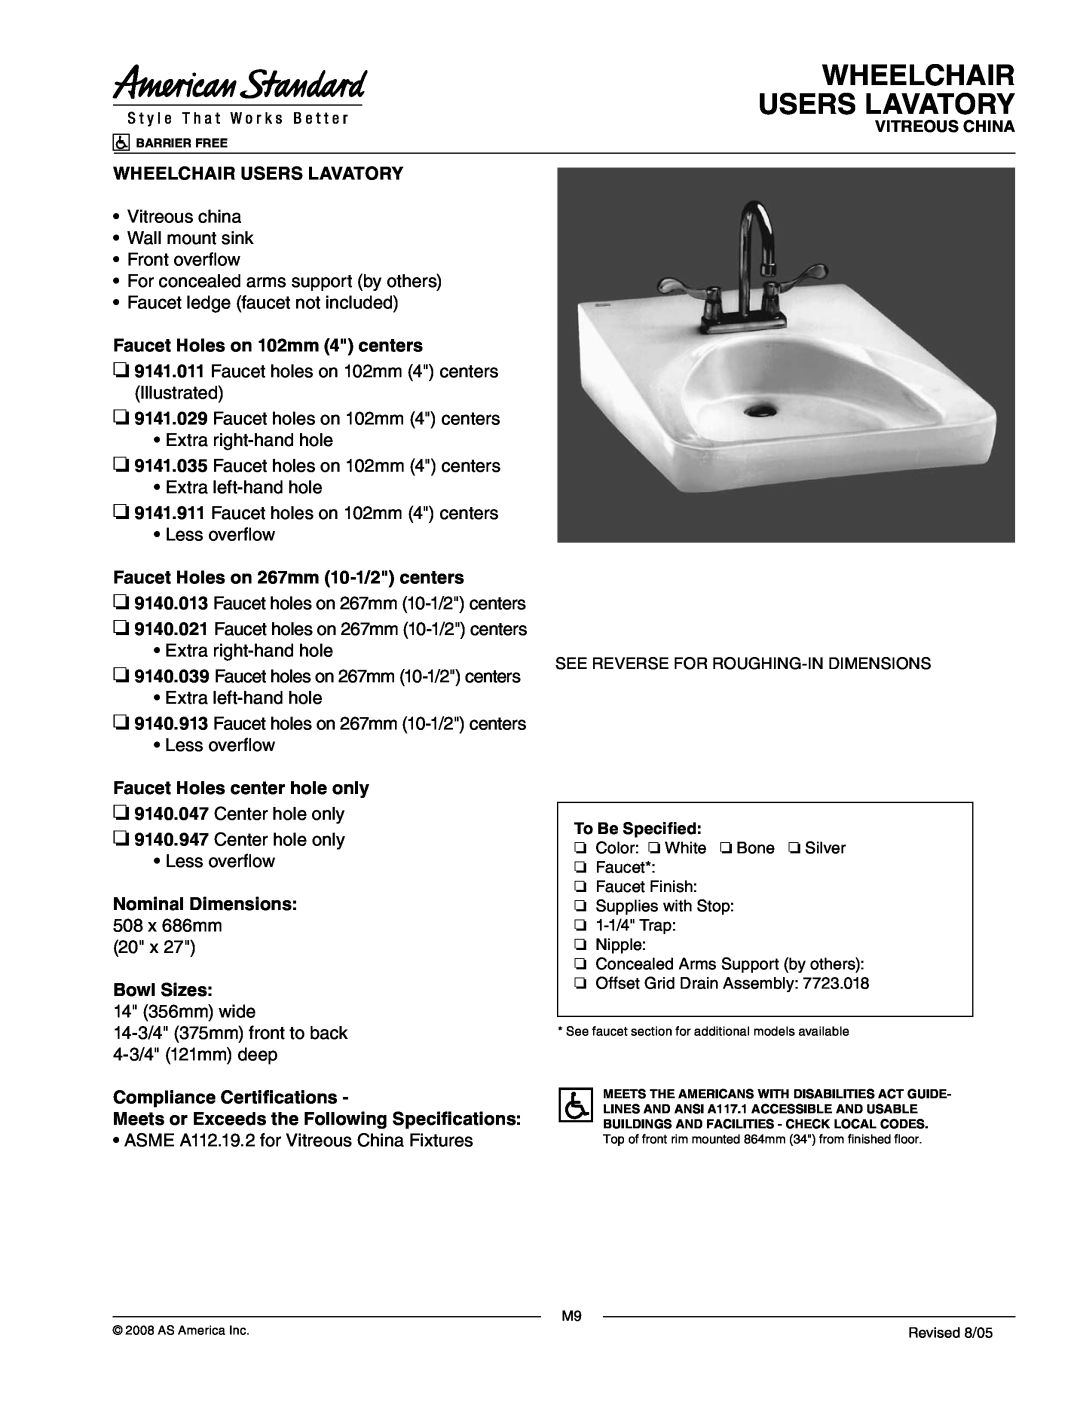 American Standard 9140.947 dimensions Wheelchair Users Lavatory, Faucet Holes on 102mm 4 centers, Nominal Dimensions 